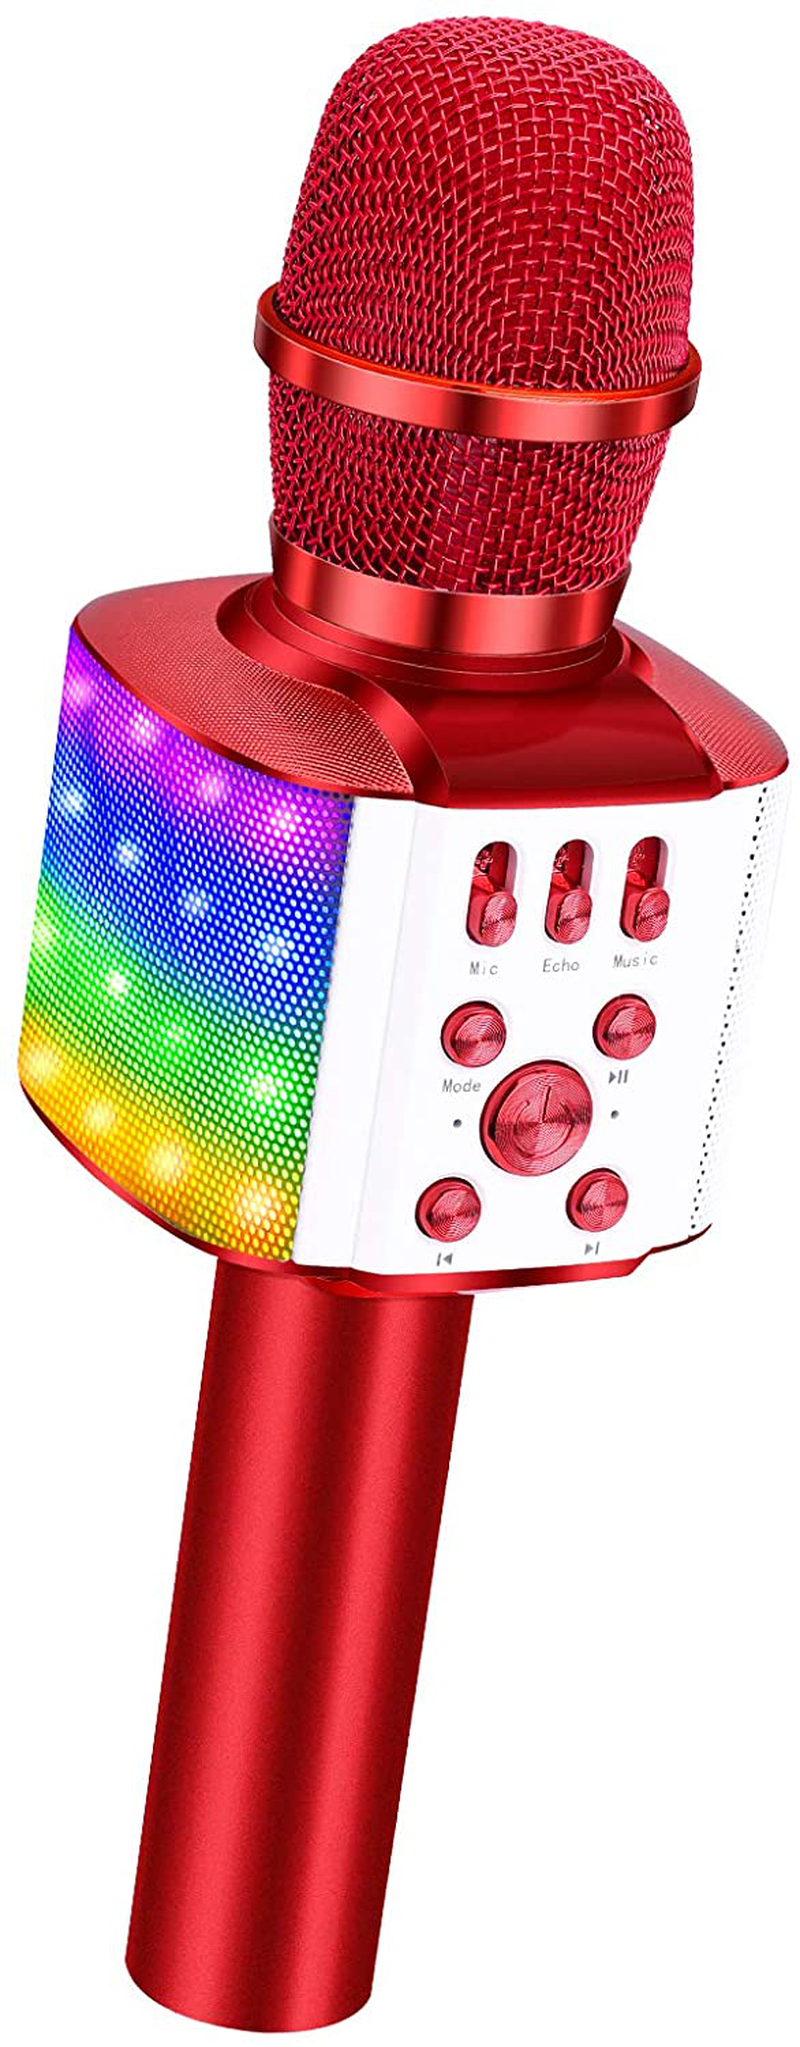 BONAOK Wireless Bluetooth Karaoke Microphone with controllable LED Lights, 4 in 1 Portable Karaoke Machine Mic Speaker Birthday Home Party for All Smartphones PC(Q36 Red)